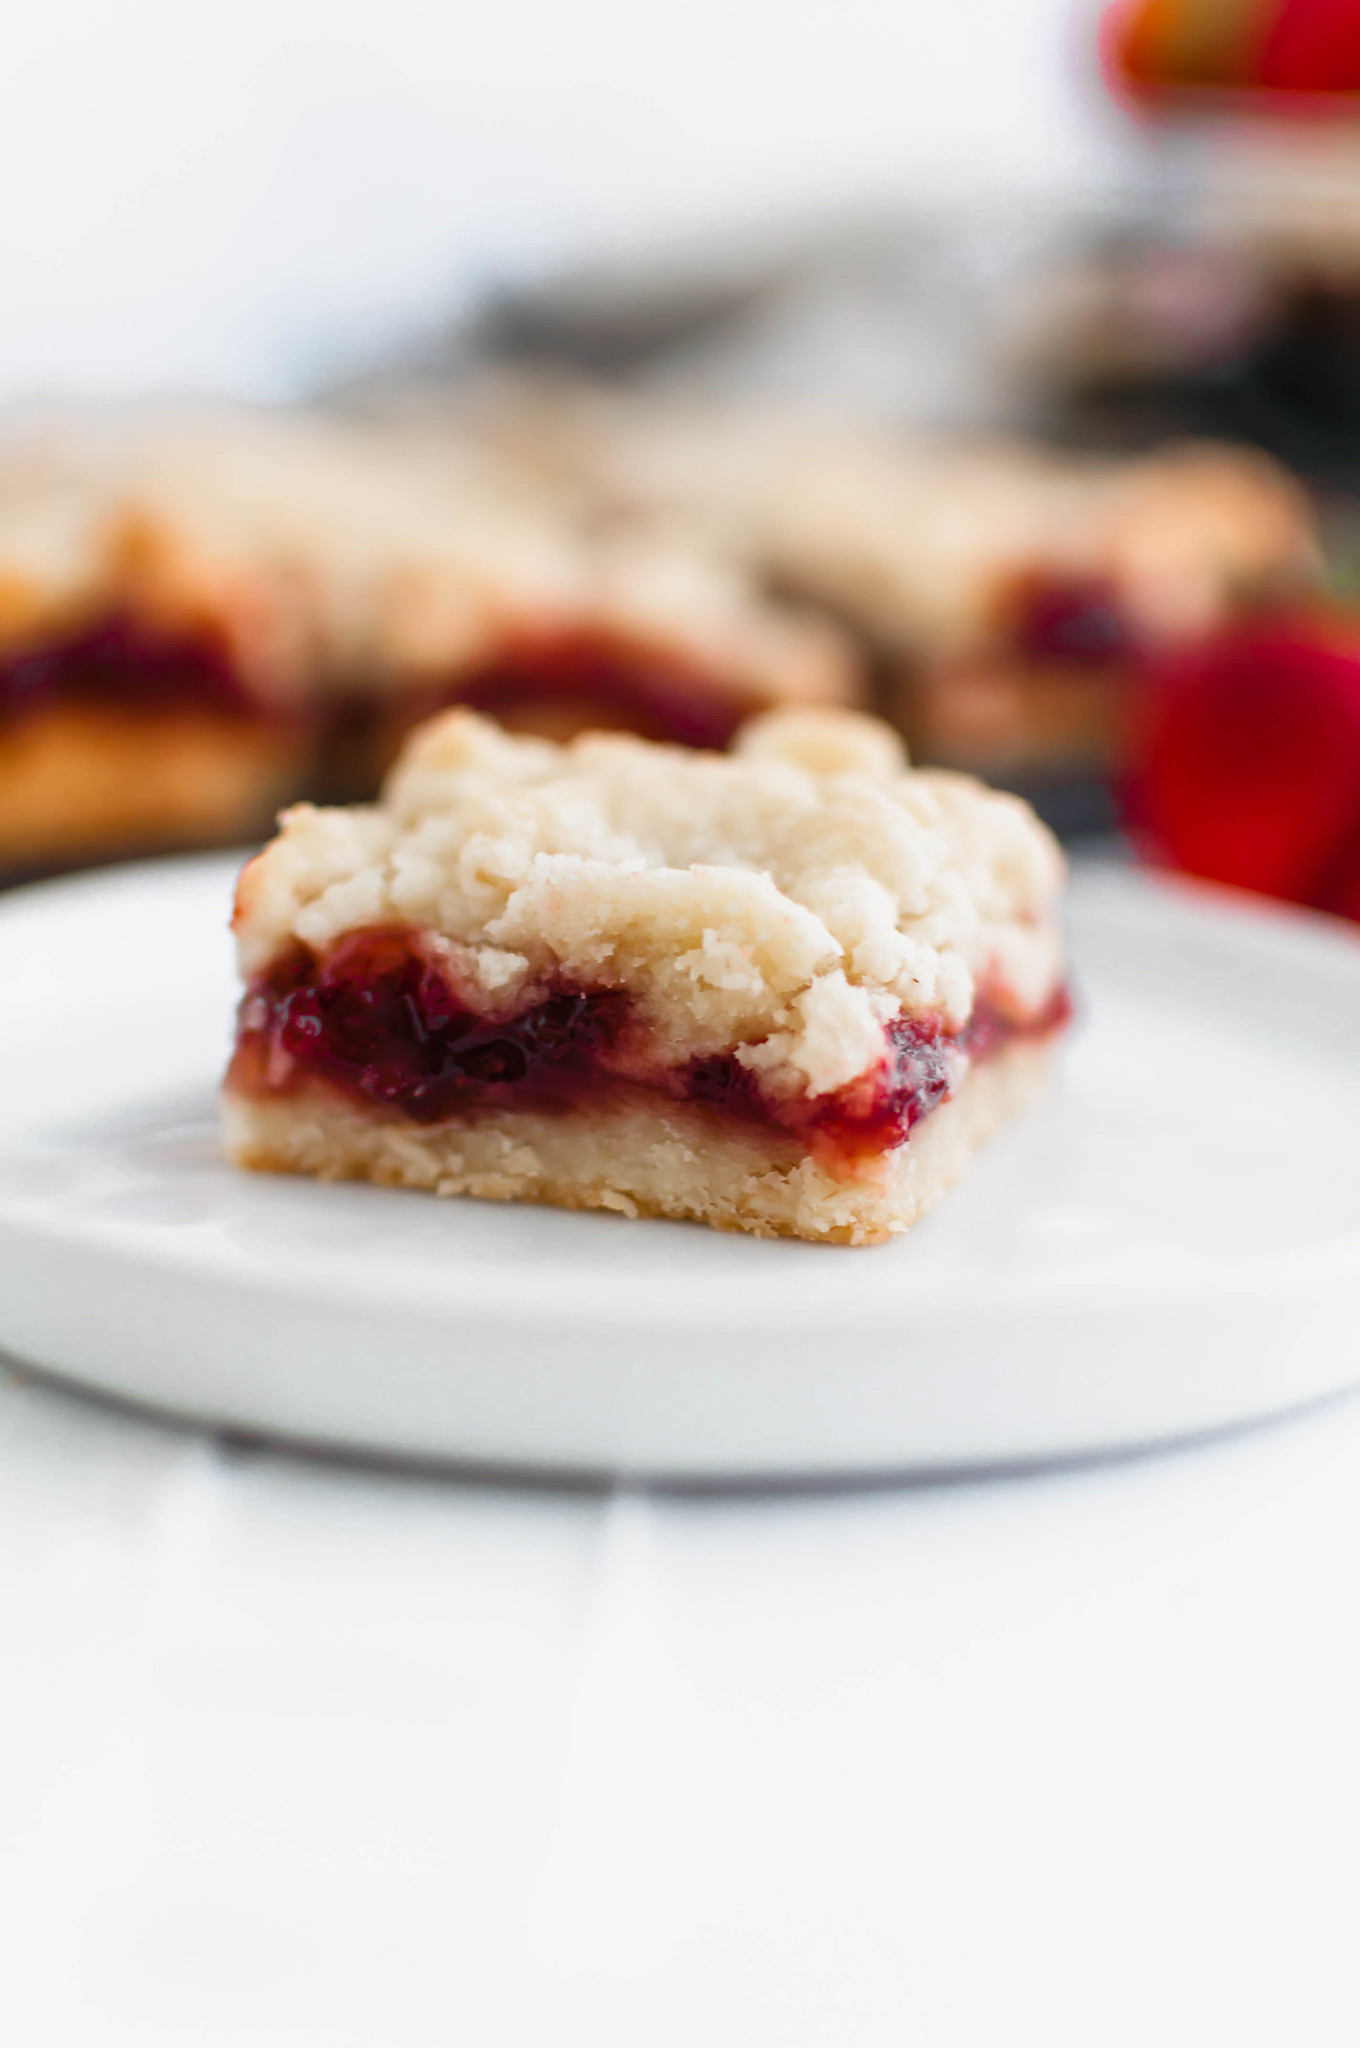 These Strawberry Crumb Bars are an amazing summer dessert. The simple shortbread crust also doubles as the crumble on top. Old-fashioned oats add a delicious chewy texture to the crust.